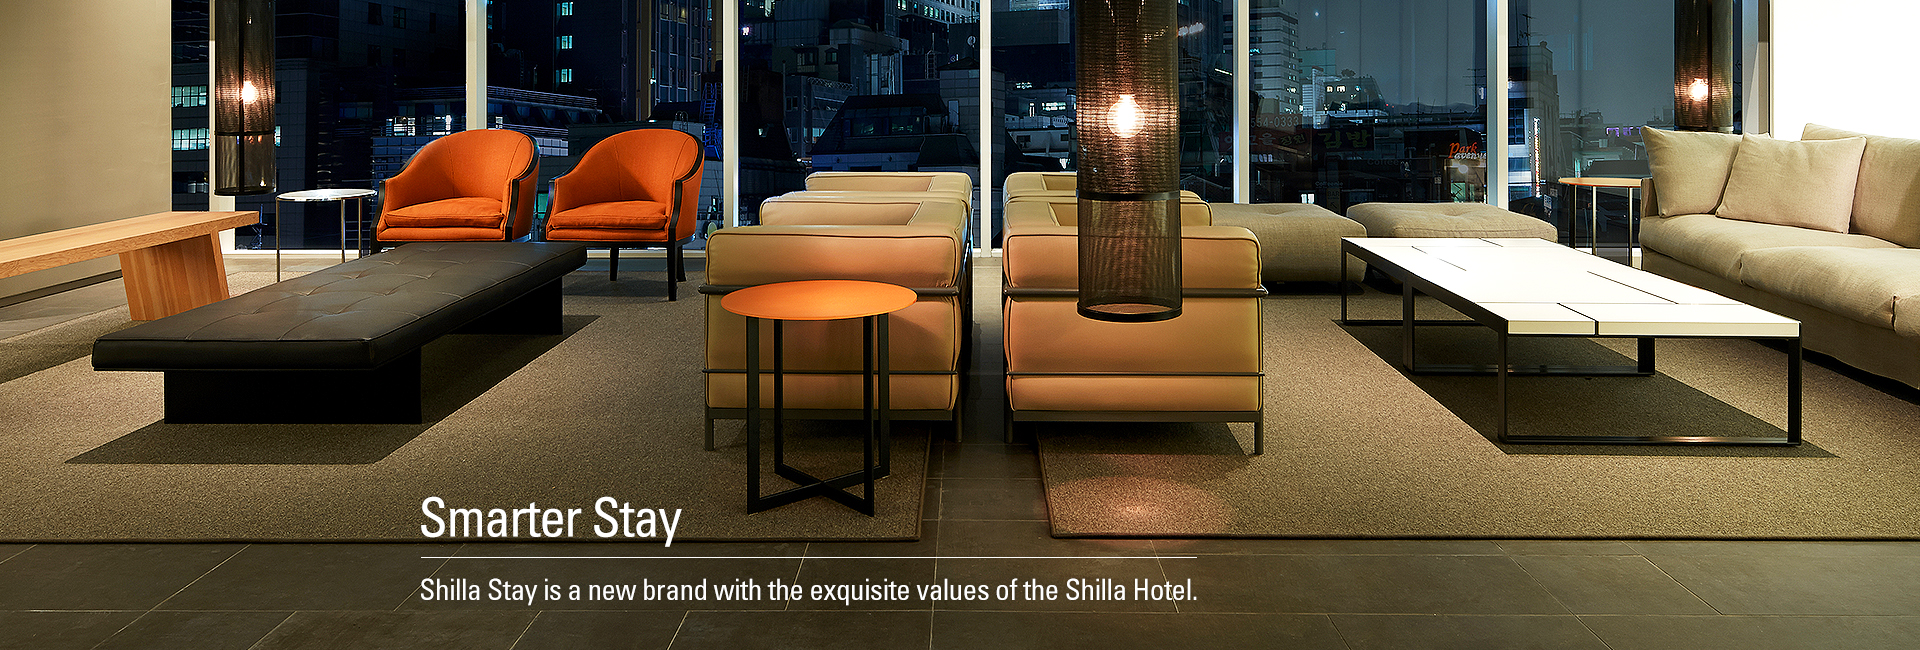 Shilla Stay is a new brand with the exquisite values of the Shilla Hotel.